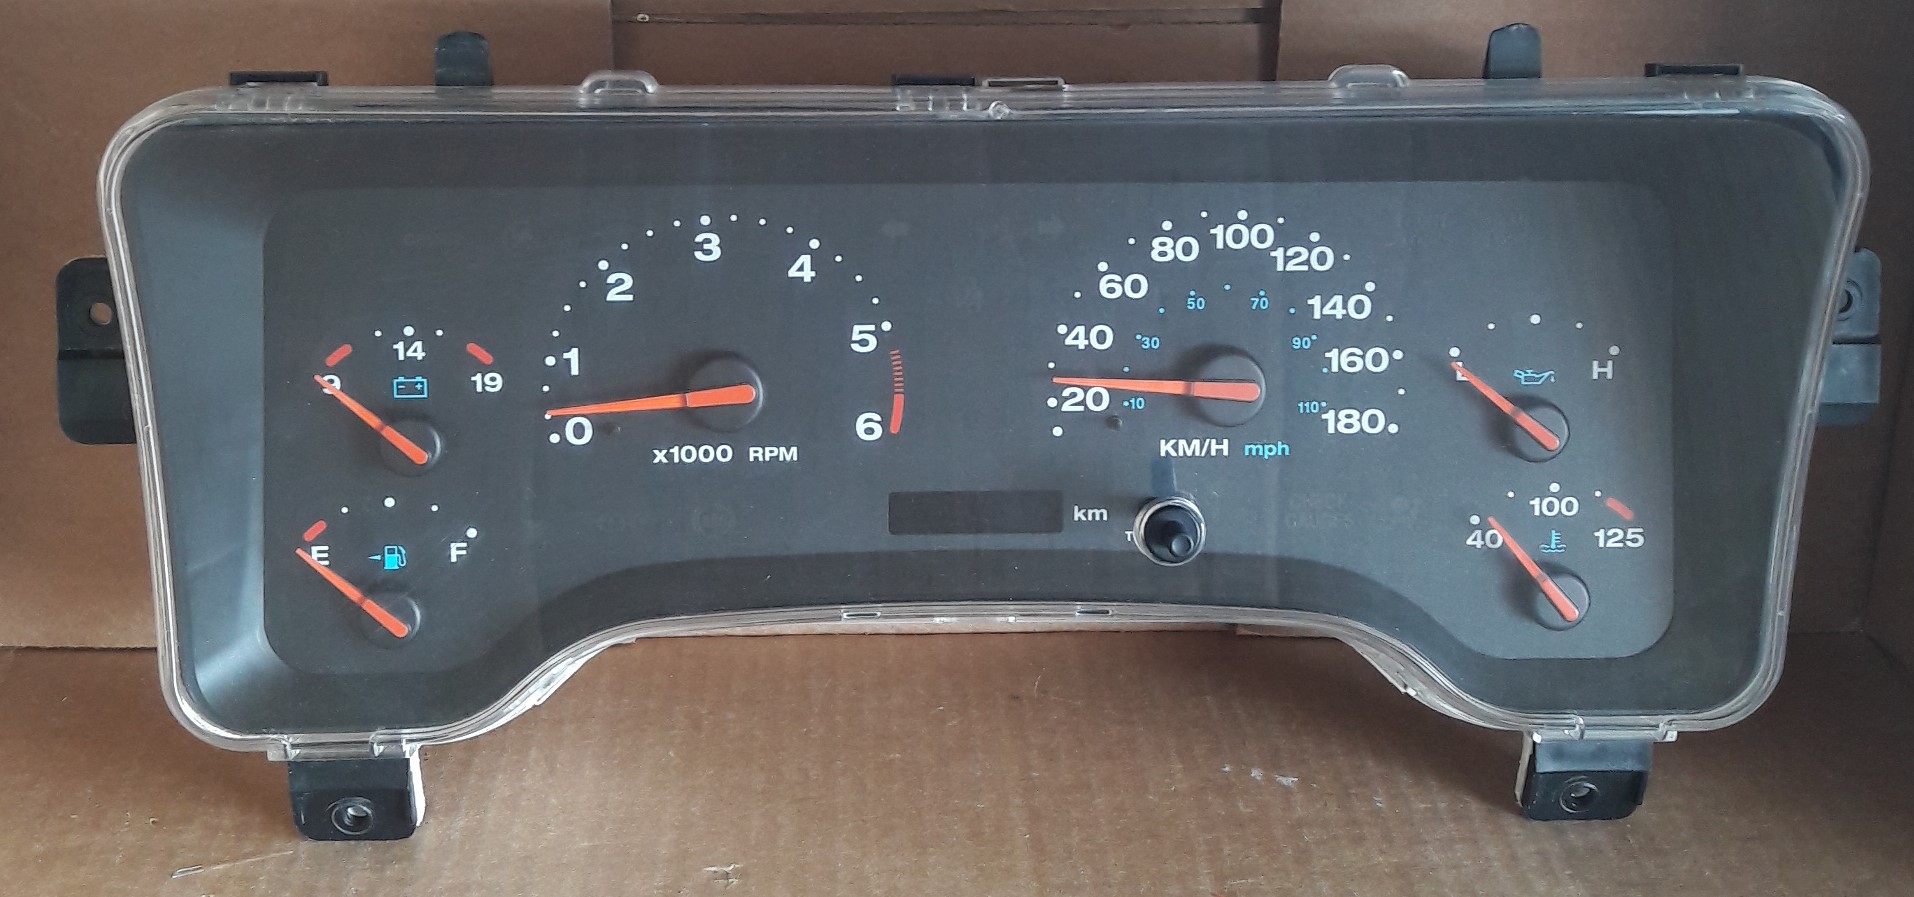 1999-2005 JEEP TJ USED DASHBOARD INSTRUMENT CLUSTER FOR SALE (KM/H) - DASHBOARD  INSTRUMENT CLUSTER